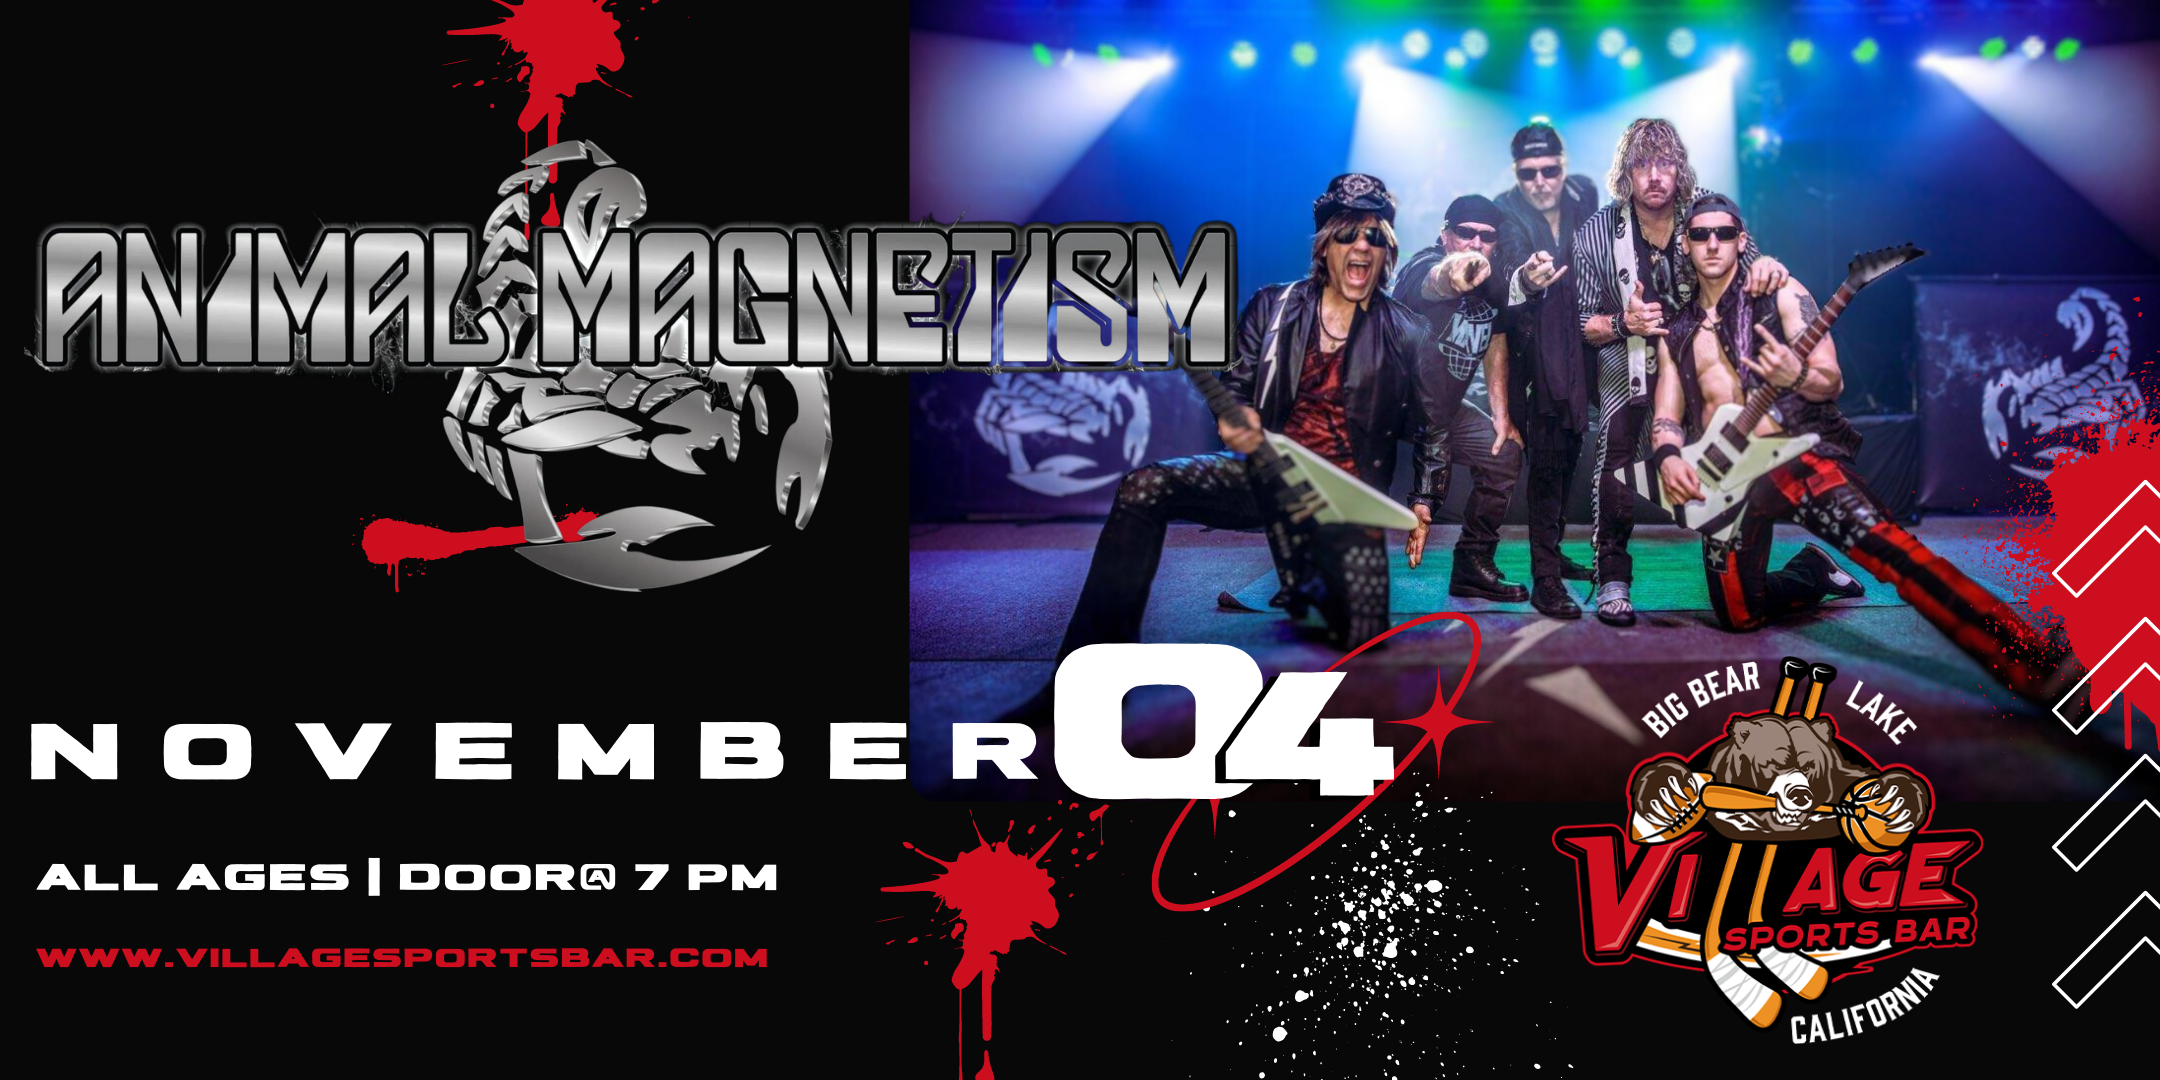 Village Sports Bar Presents: Animal Magnetism - Tribute to The Scorpions